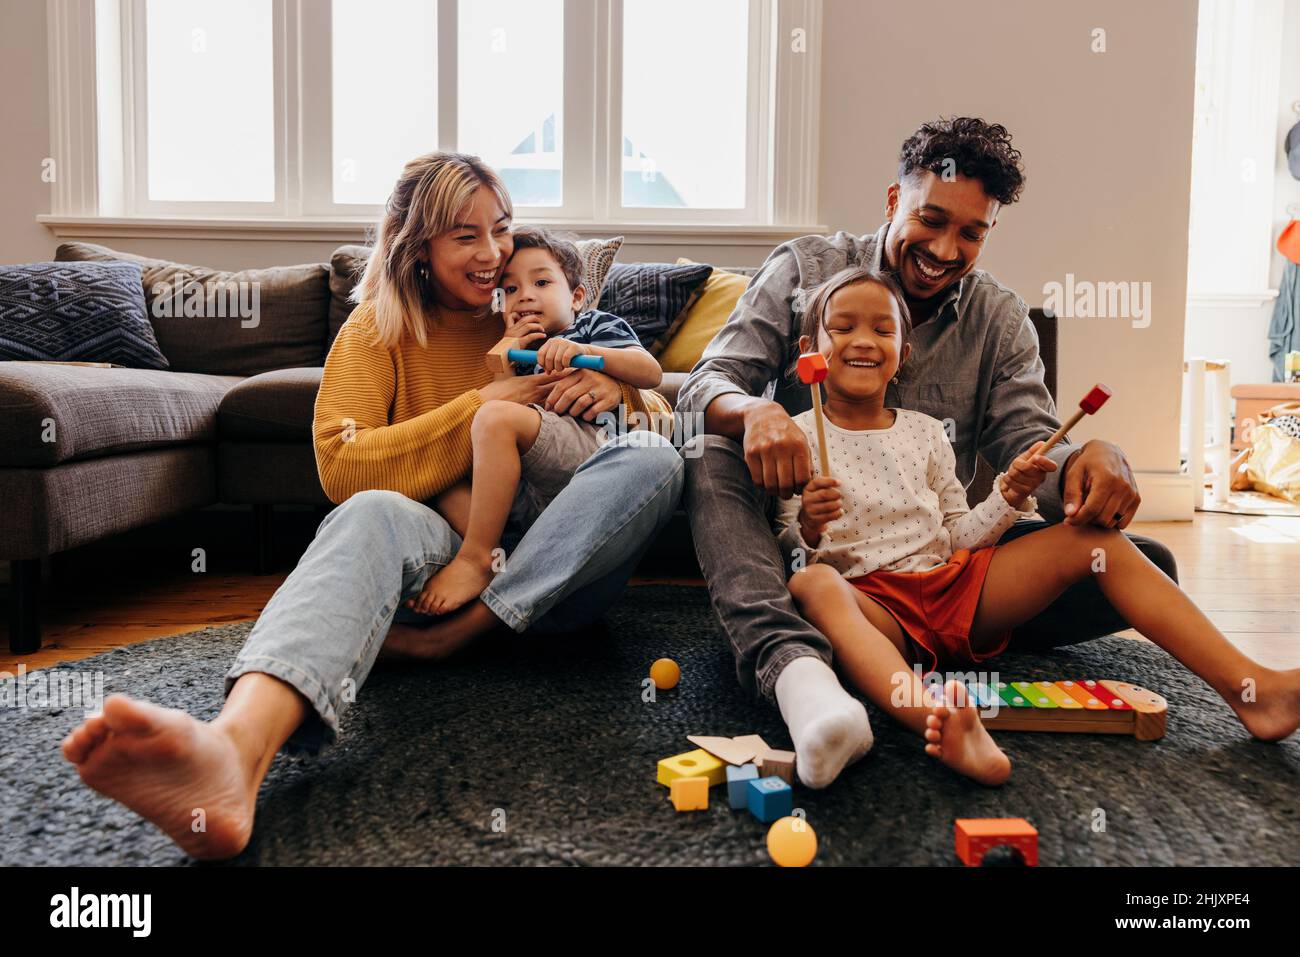 Loving parents playing with their son and daughter in the living room. Mom and dad having fun with their kids during playtime. Family of four spending Stock Photo